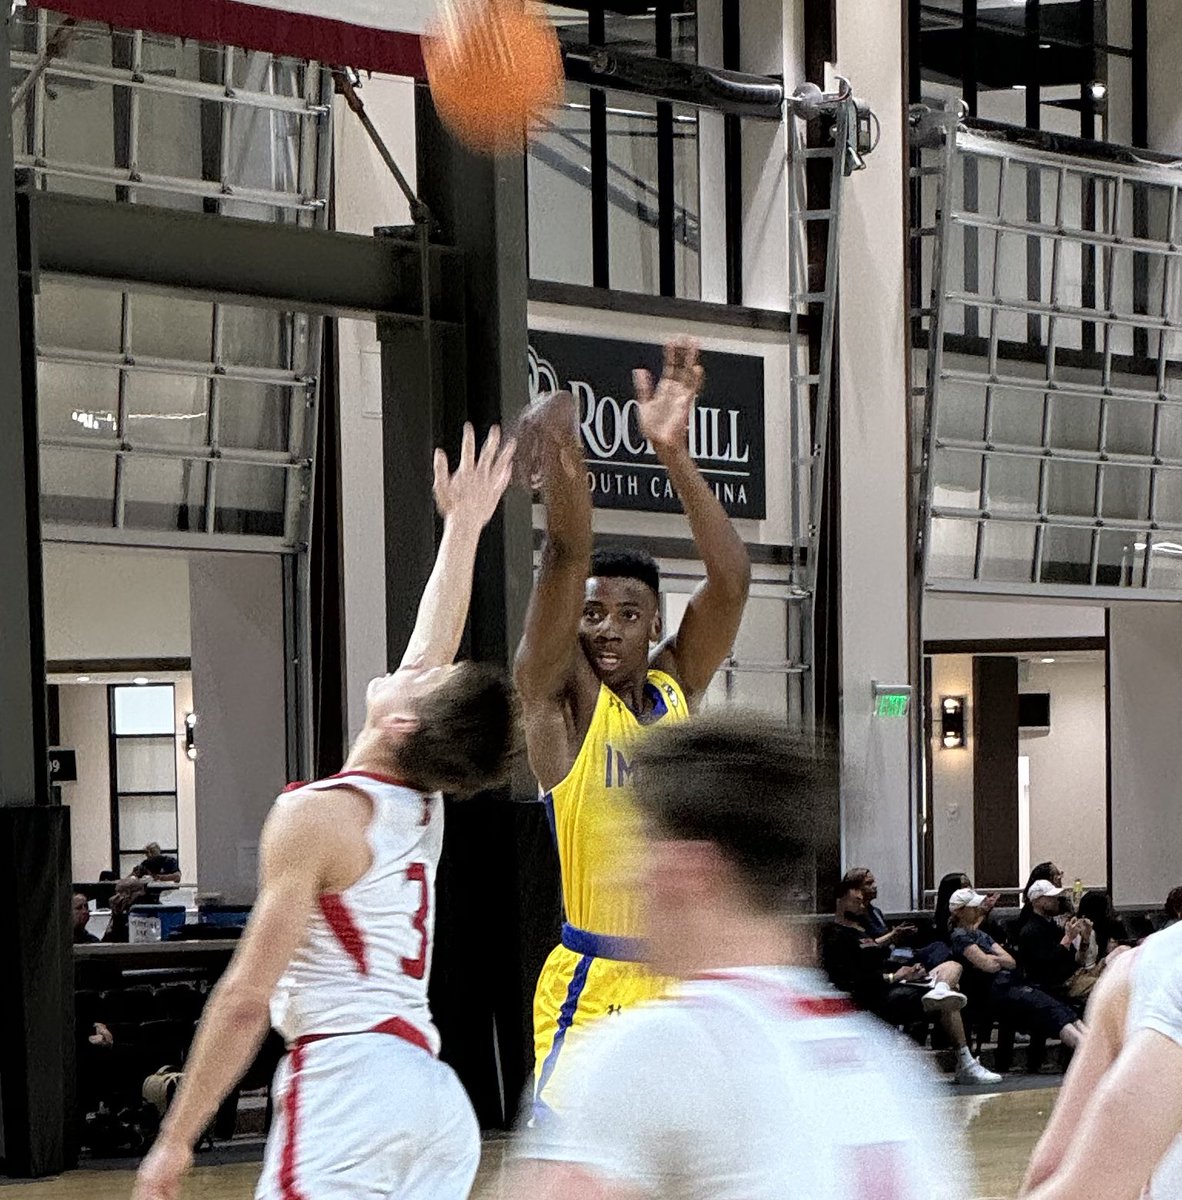 Was impressed with the maturation in King Grace’s game. Showed expanded individual offense while being efficient. Looks a little bigger and in great shape. Made shots, found chances to attack the rim with one or two bounces, and played within the flow. 247sports.com/article/scouti…